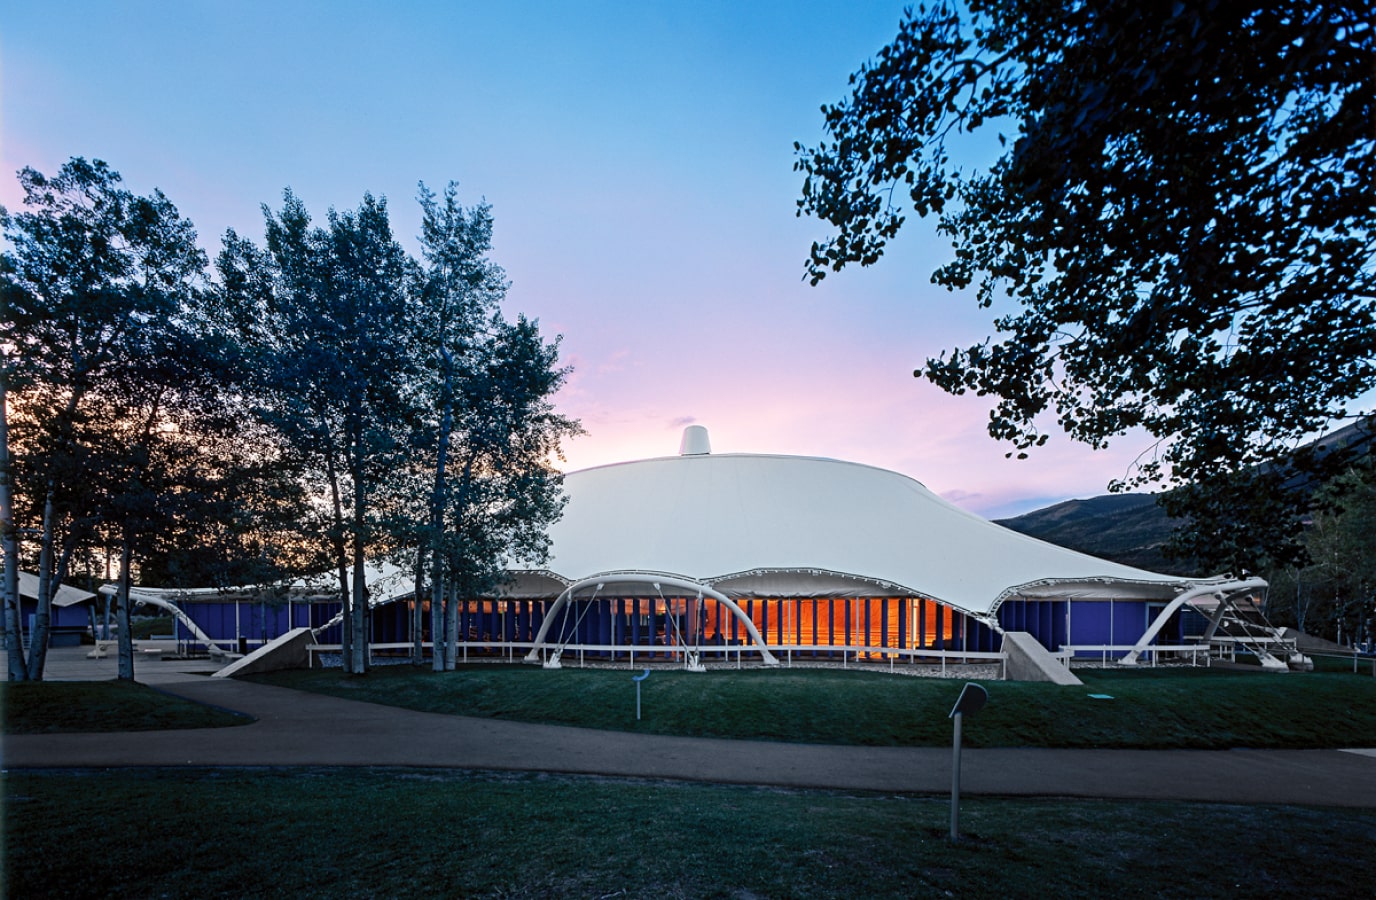 Aspen Music Festival & School - Benedict Music Tent, Aspen, Colorado. The elegant tensile structure nestles into the sight. Another summit on the horizon. © Timothy Hursley